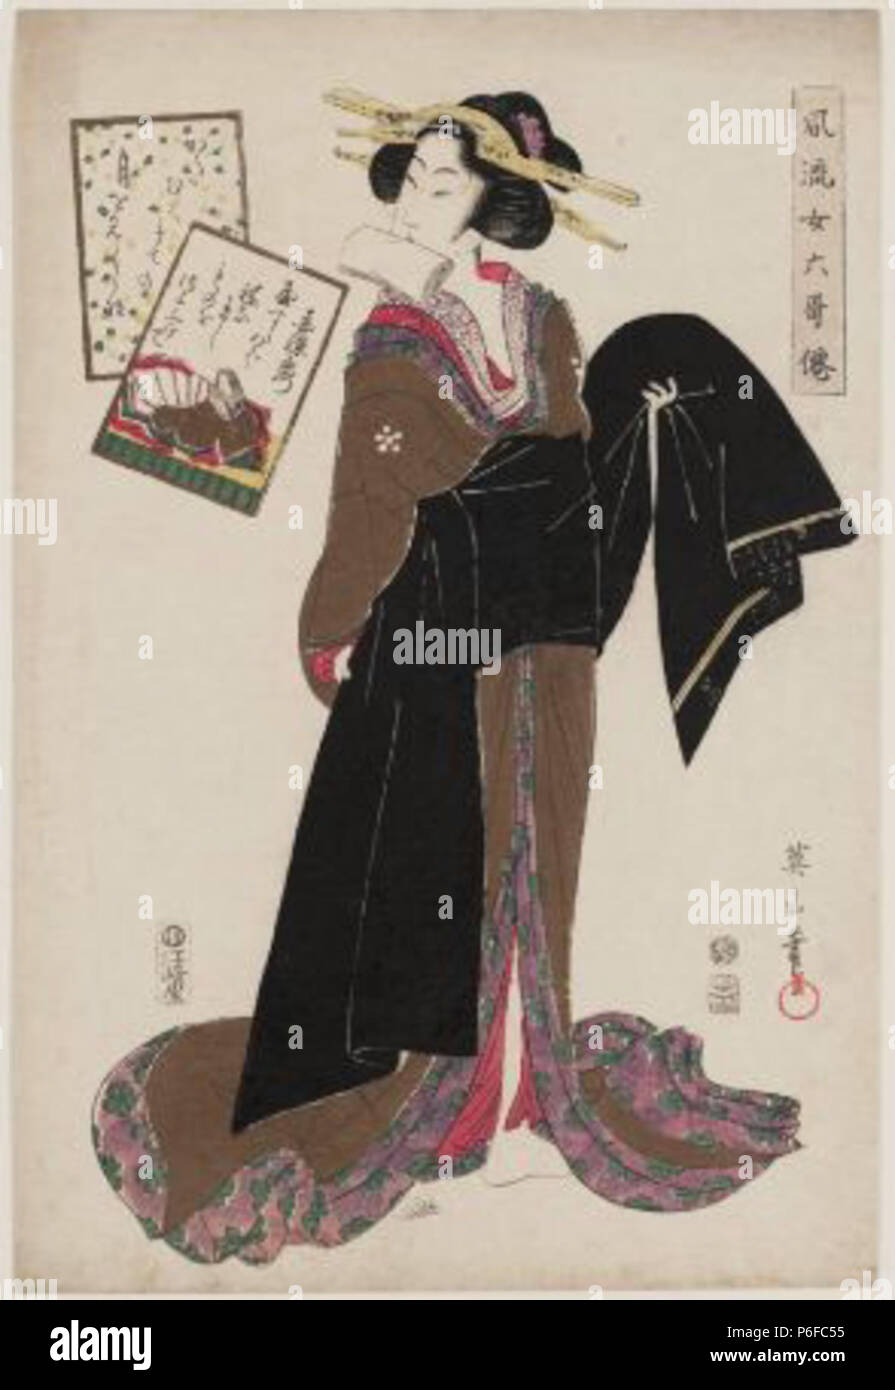 ???: ????????????? English: Akazome Emon, Heian era writer and lady-in-waiting, depicted here in a 19th Woodblock print (nishiki-e) print; ink and color on paper.  ???: ??8??? Published in 1811 1 Akazome Emon 1811 Stock Photo